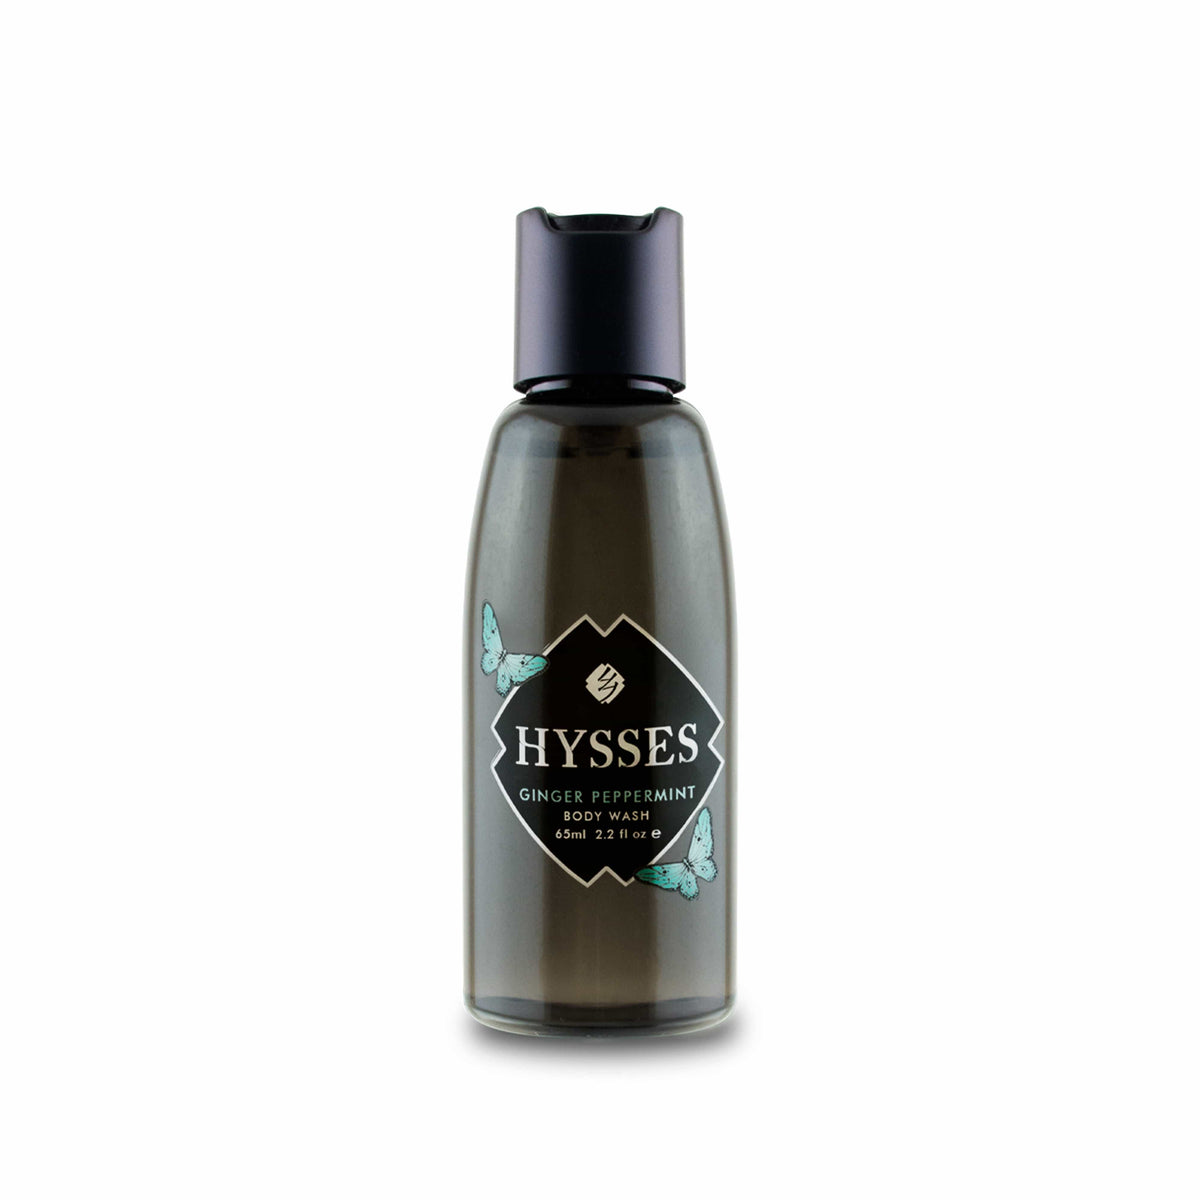 Hysses Body Care Body Wash Ginger Peppermint, 65ml